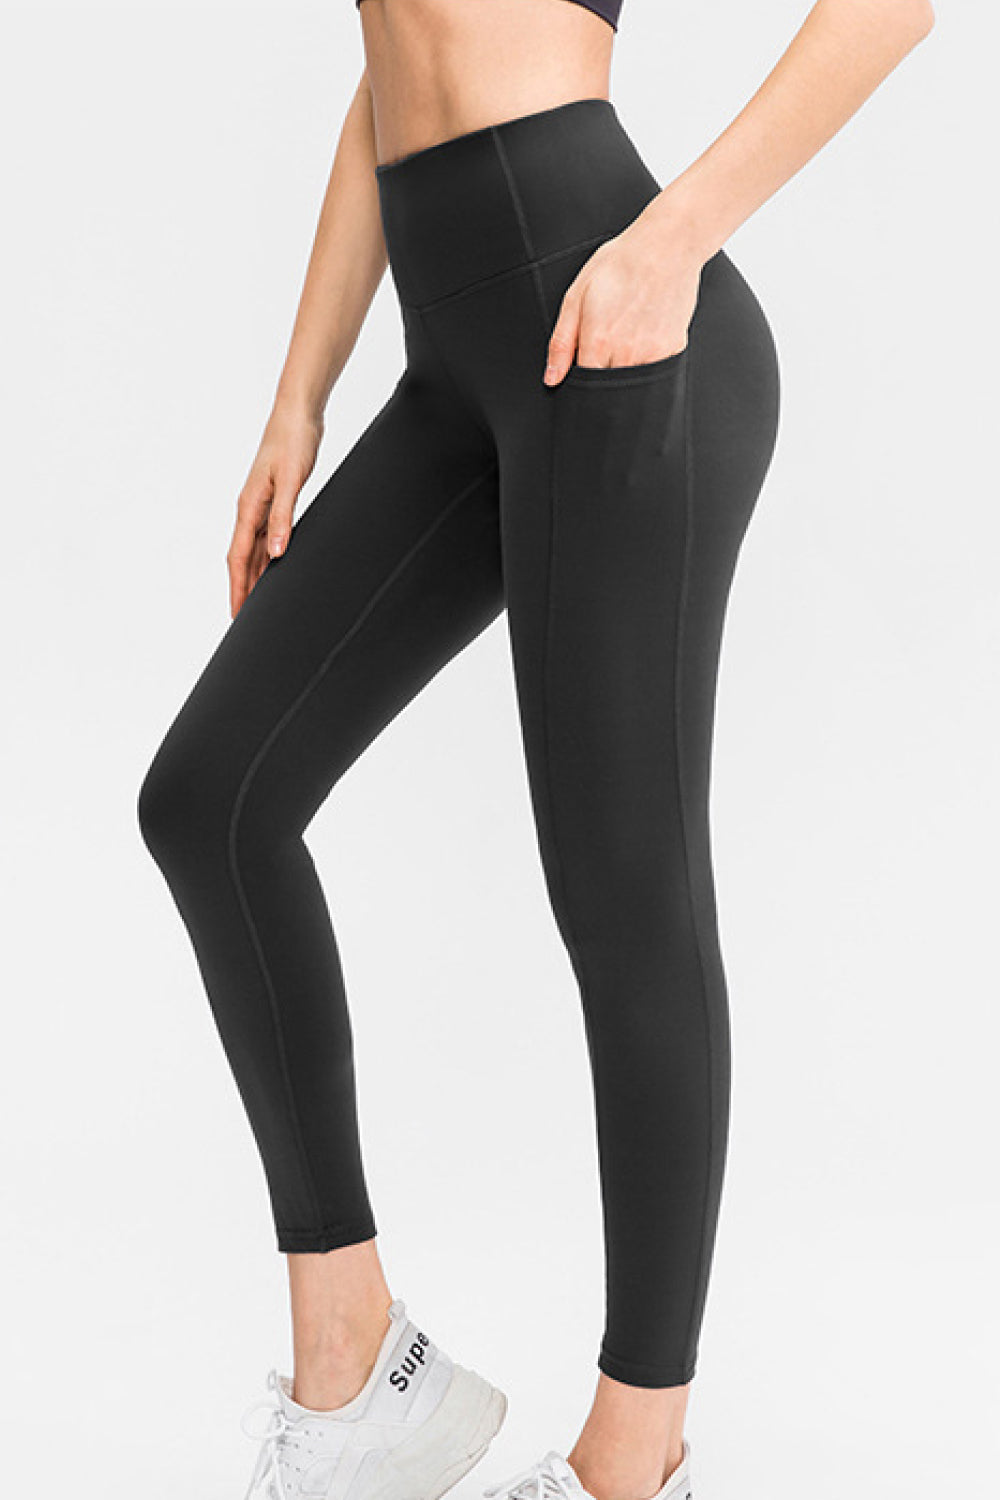 Jamison Leggings with Pockets